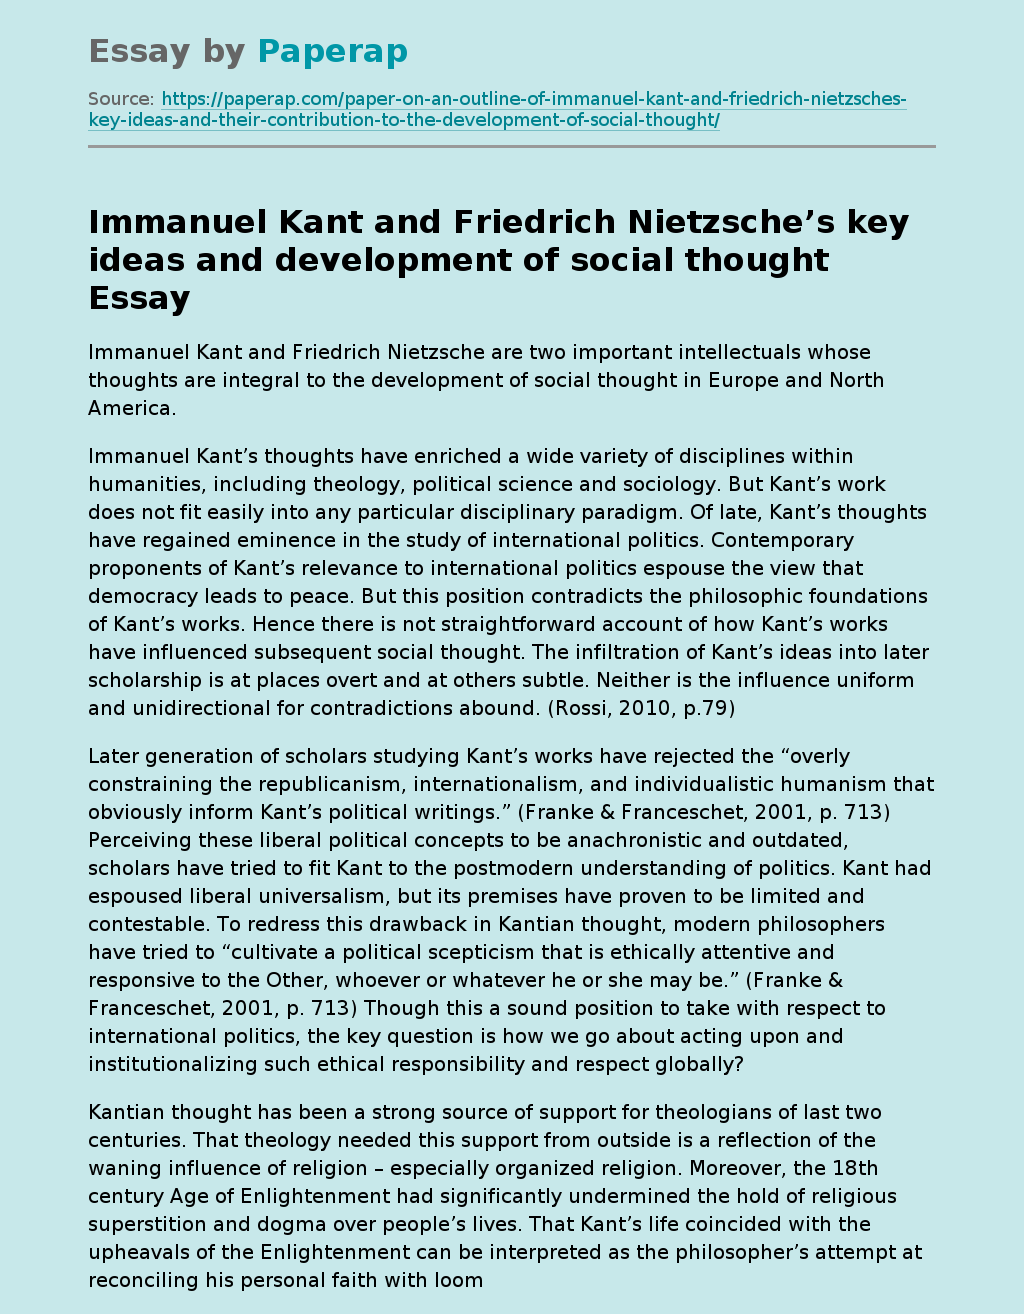 Immanuel Kant and Friedrich Nietzsche’s key ideas and development of social thought